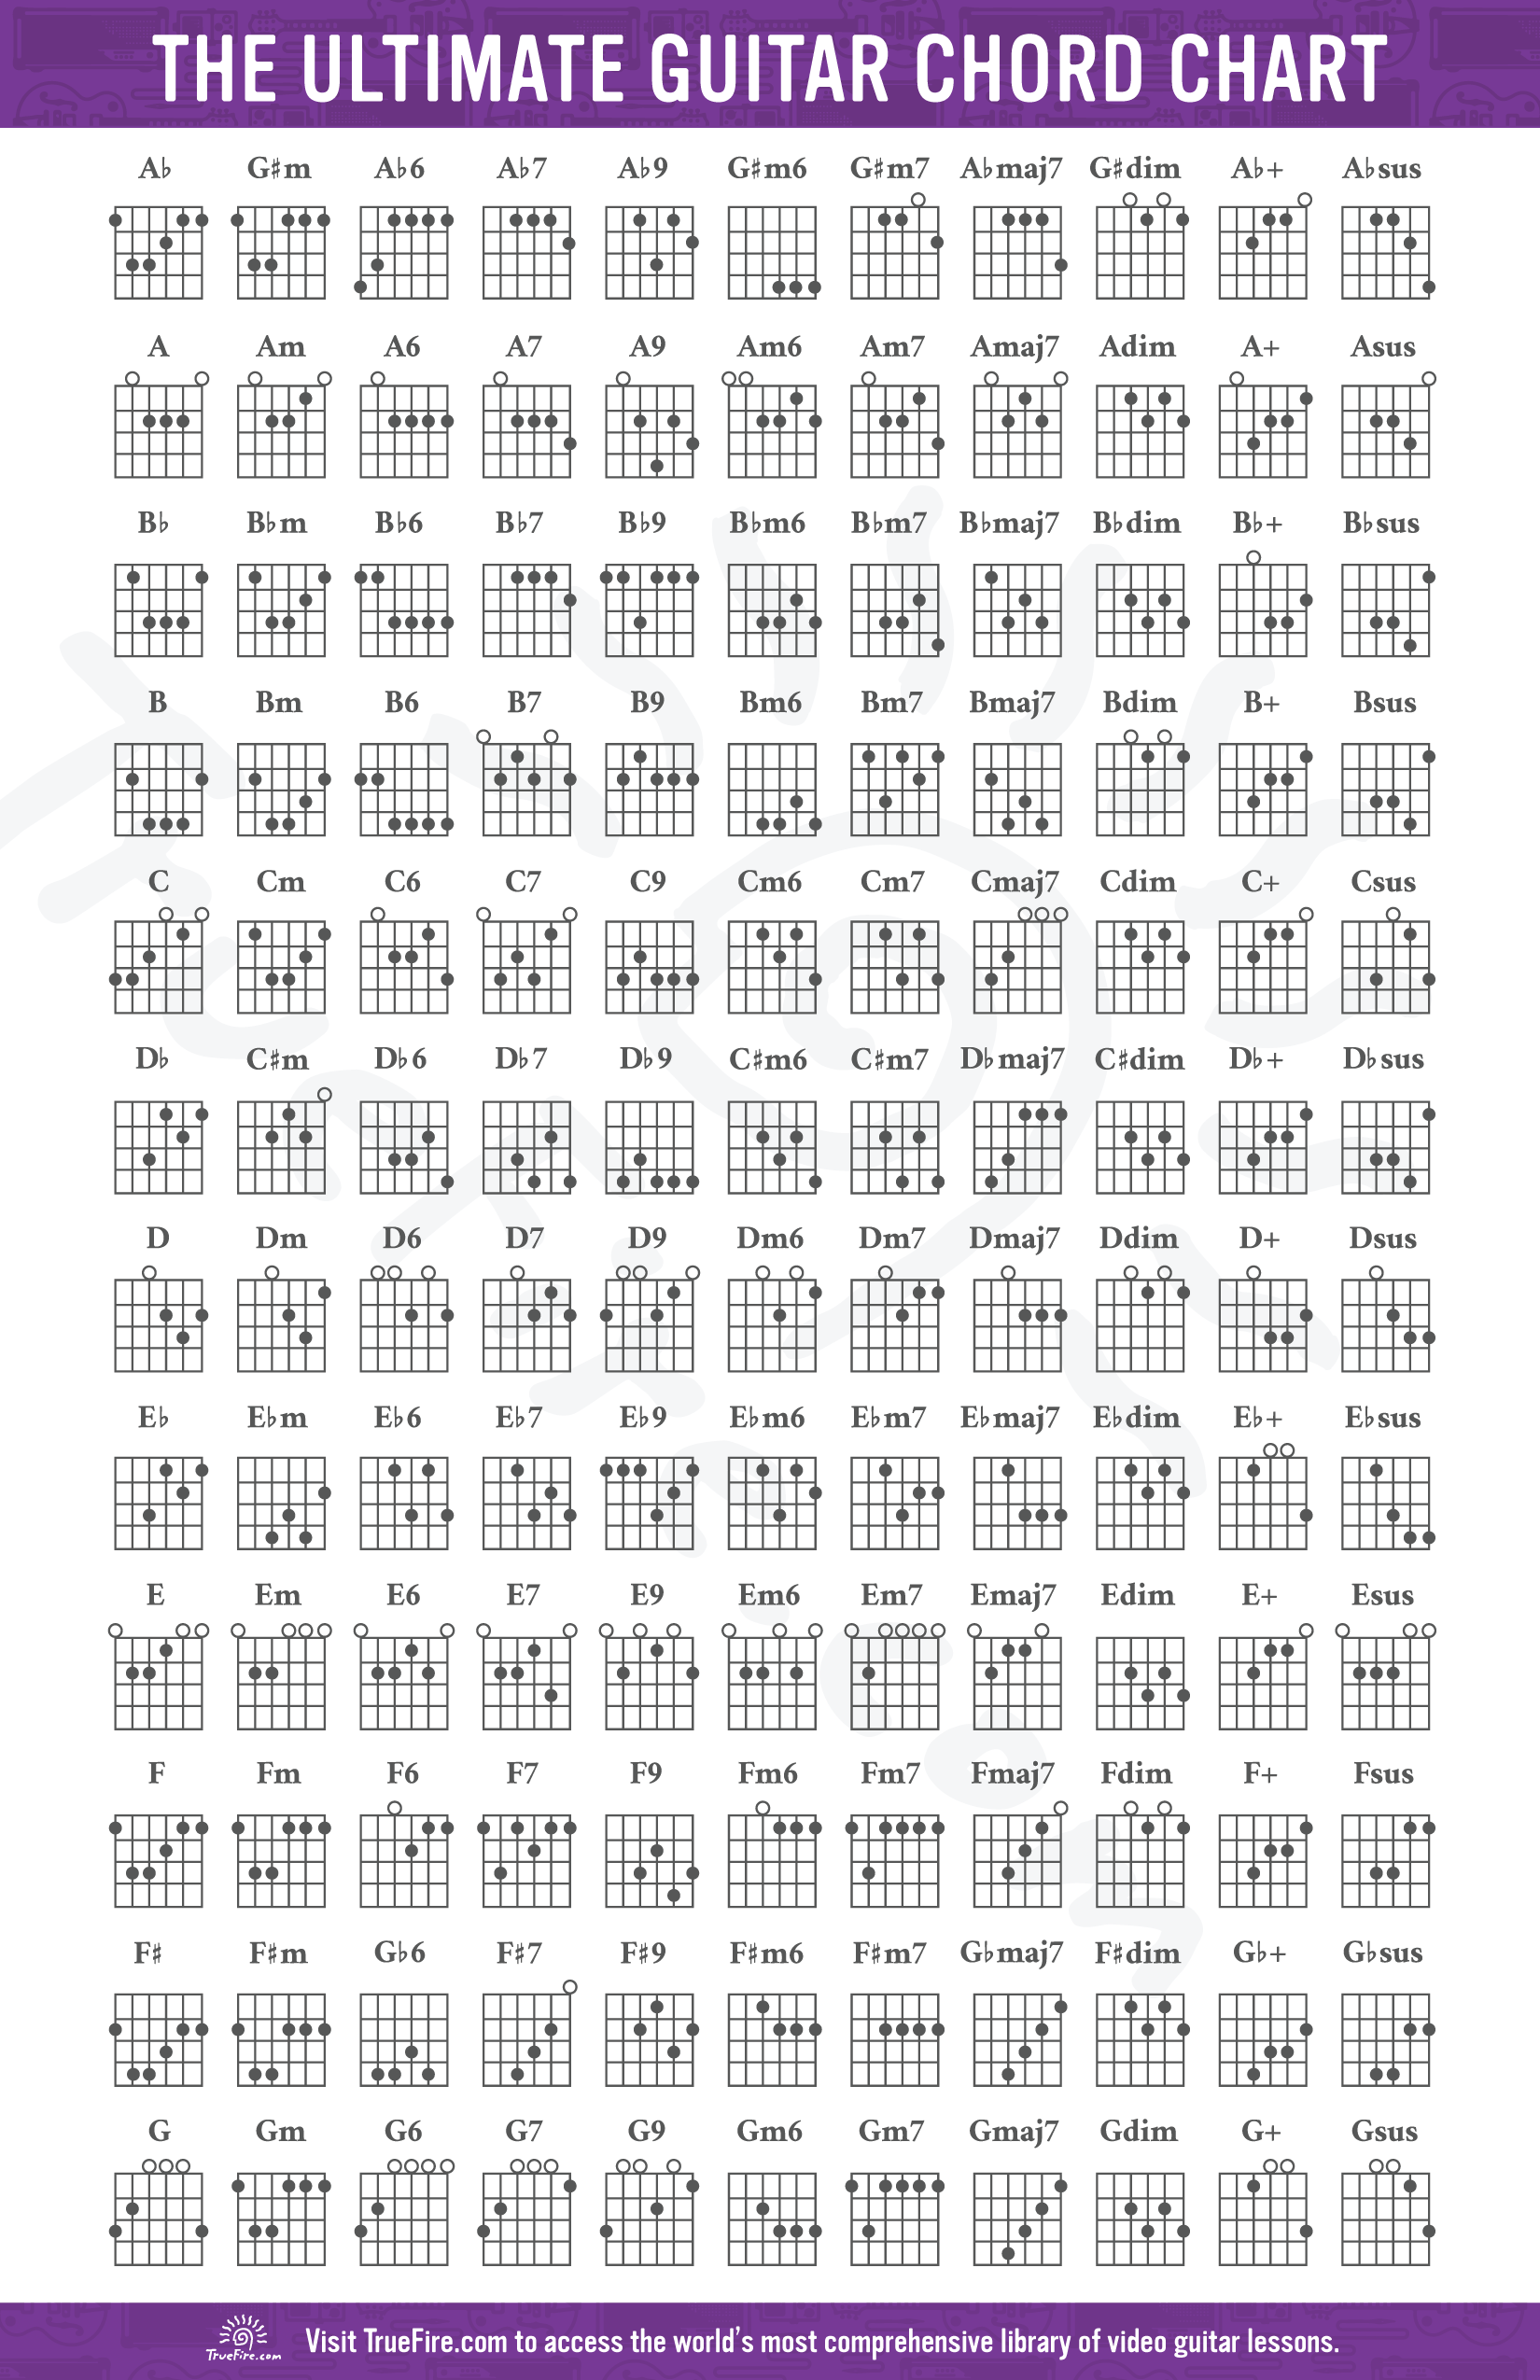 Free: The Ultimate Guitar Chord Chart